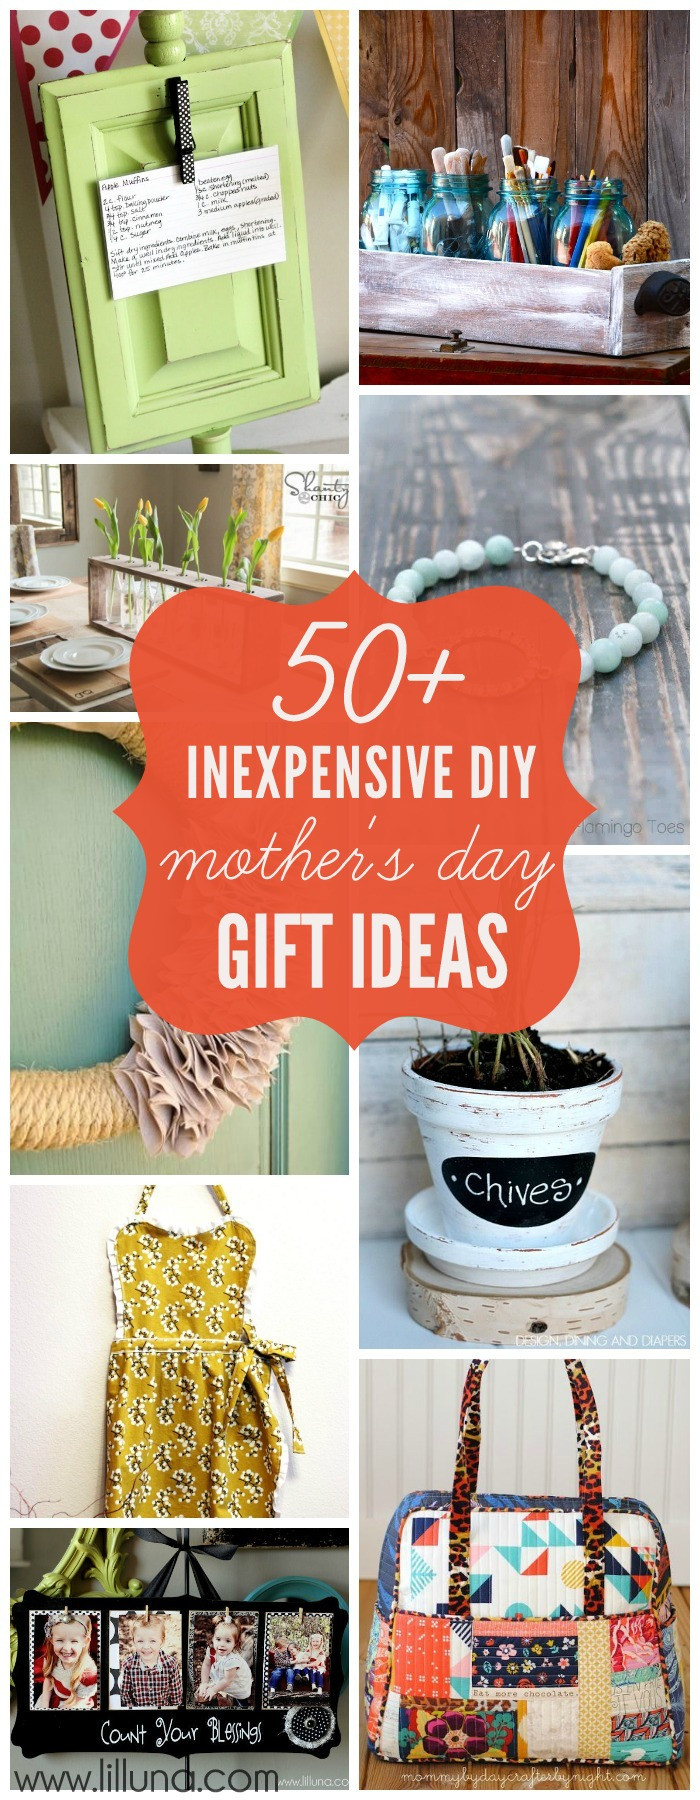 Ideas For Mothers Day Gift
 Inexpensive DIY Mother s Day Gift Ideas